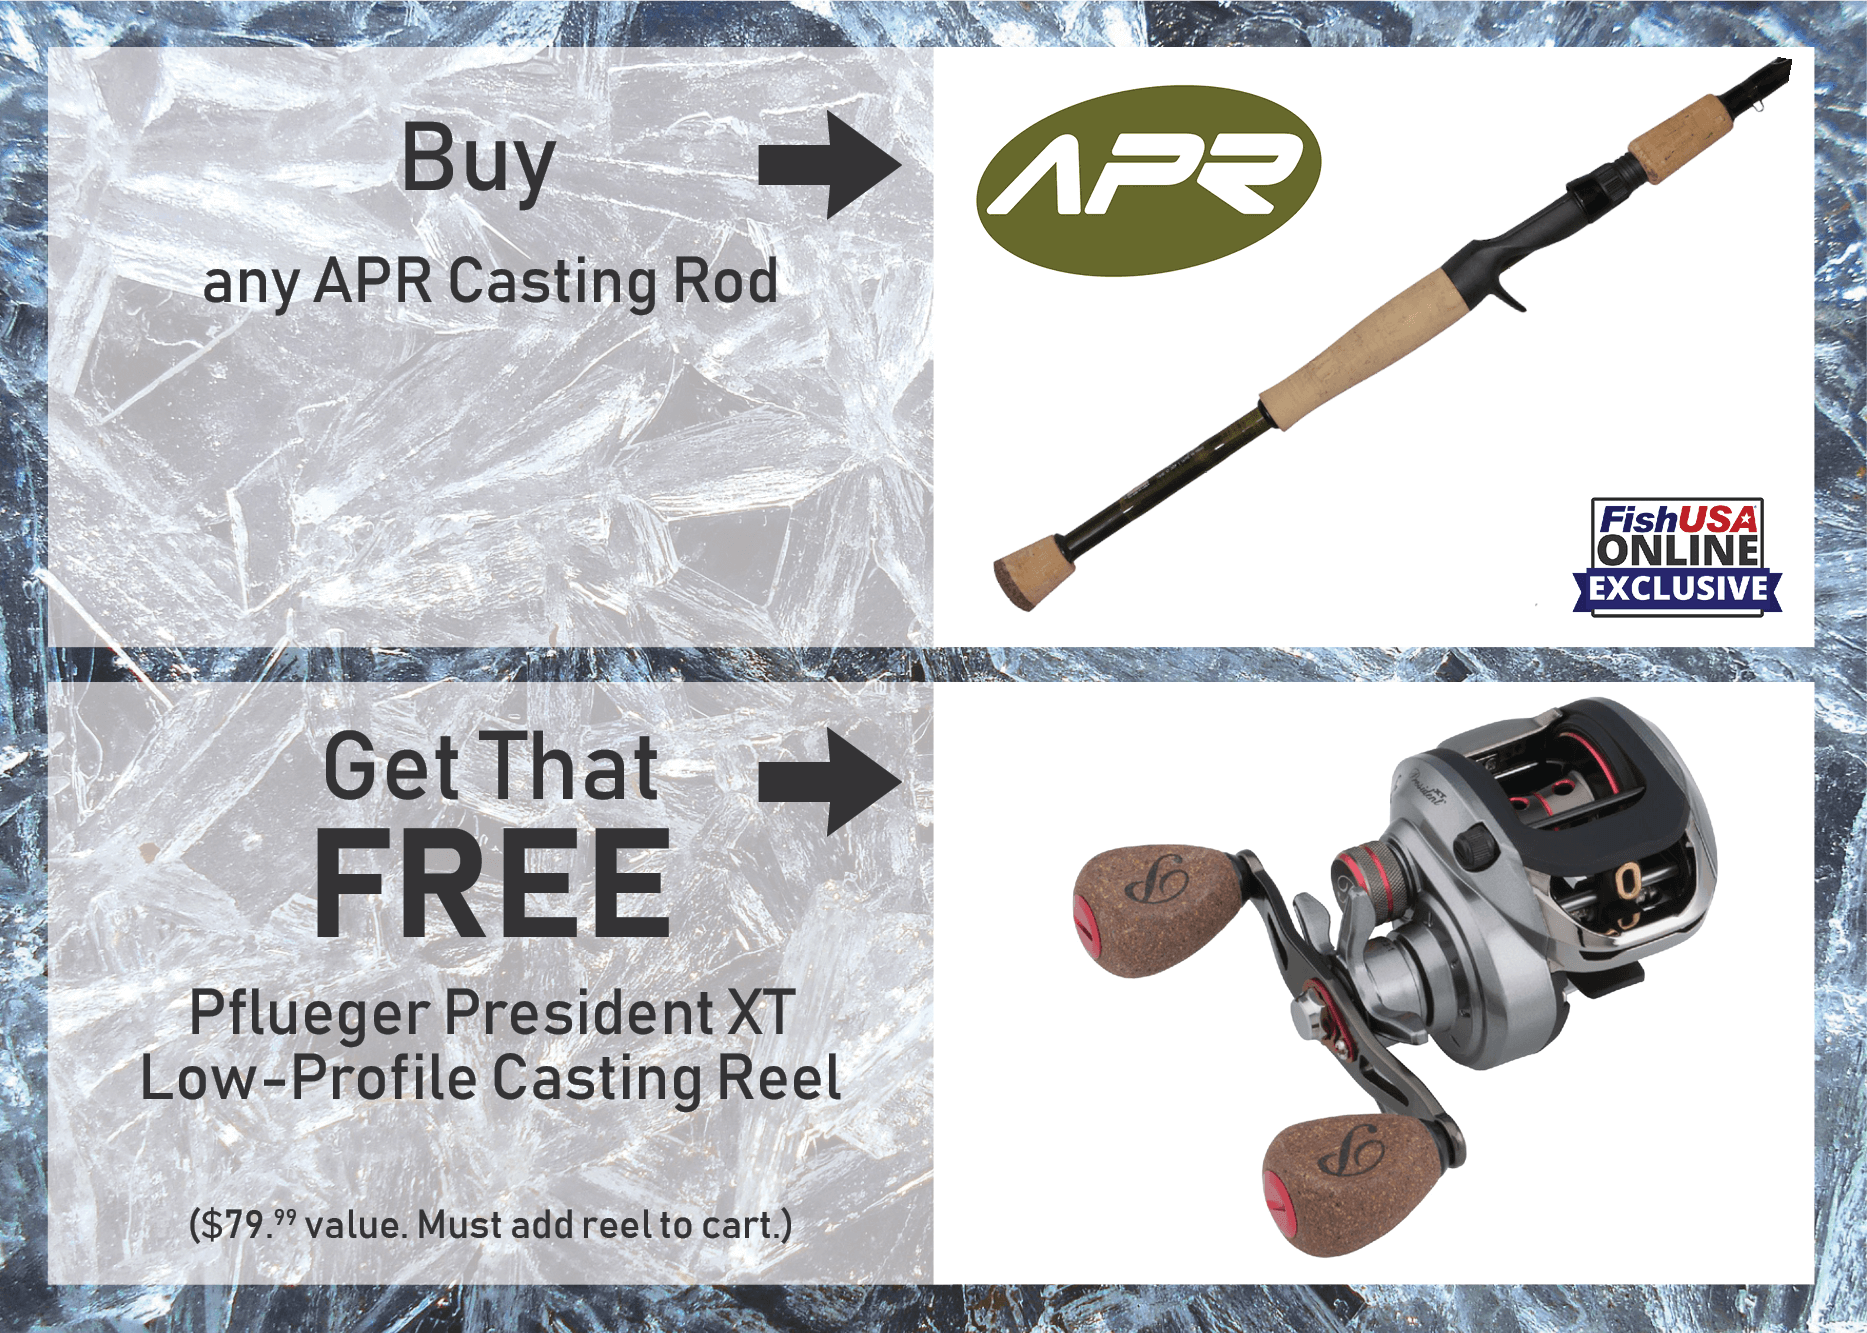 Buy any APR Casting Rod & Get a FREE Pflueger President XT Low-Profile Casting Reel